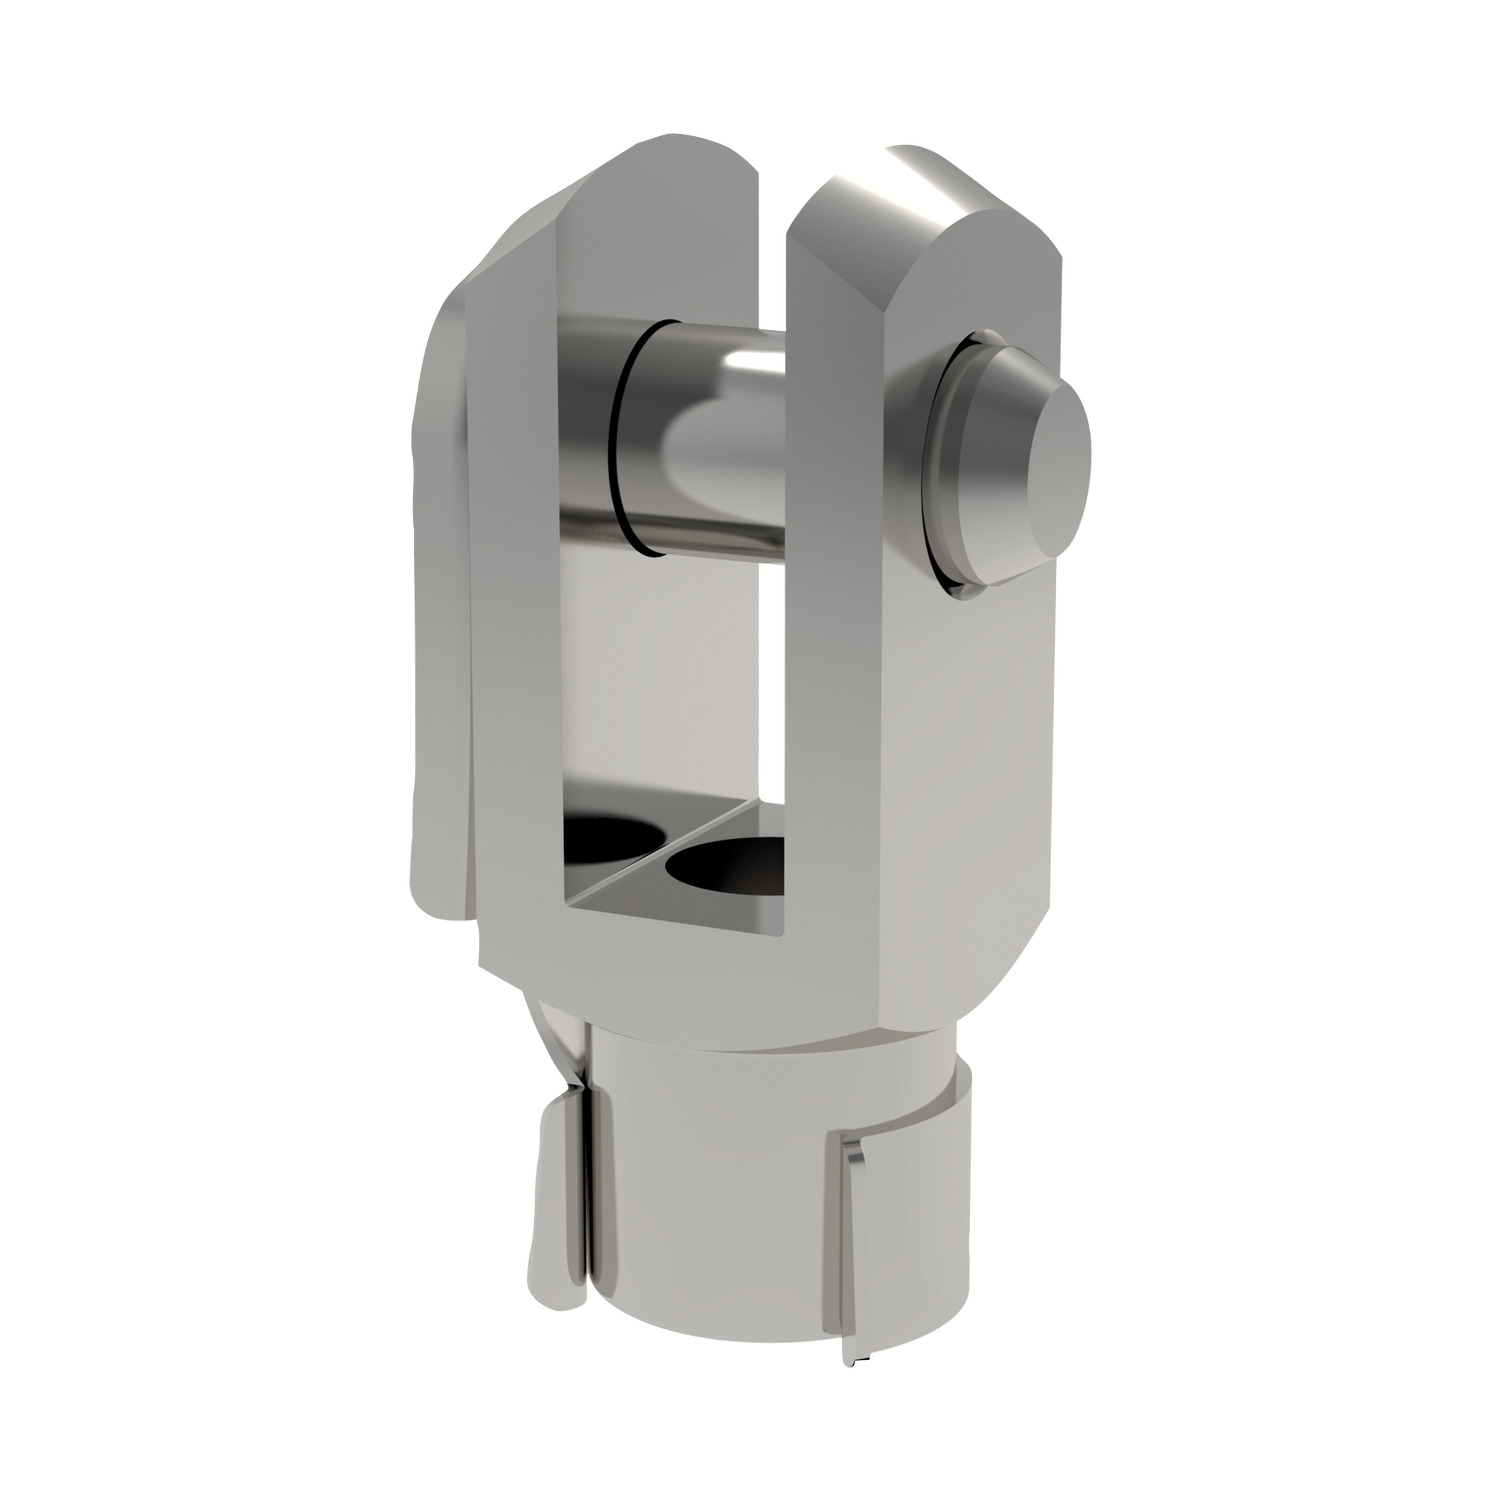 LH Clevis Joints with Retention Clip S/S Left hand thread stainless steel clevis joint complete with rentention clip.  See R3400 for right hand version.